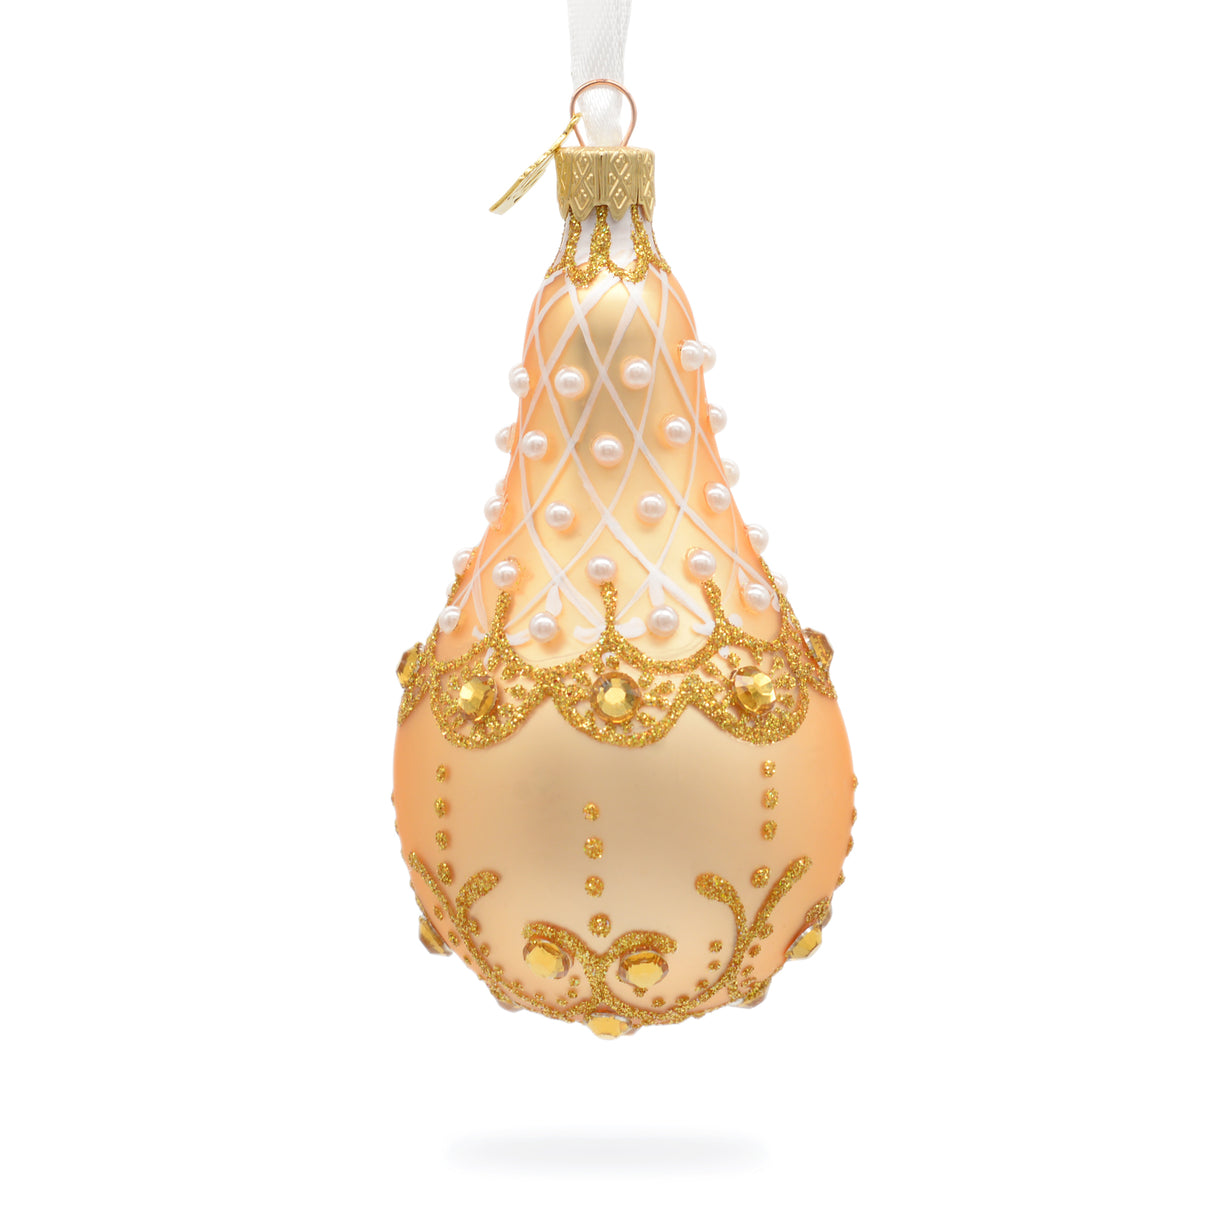 Pearls on Champagne Glass Waterdrop Ornament in Gold color,  shape